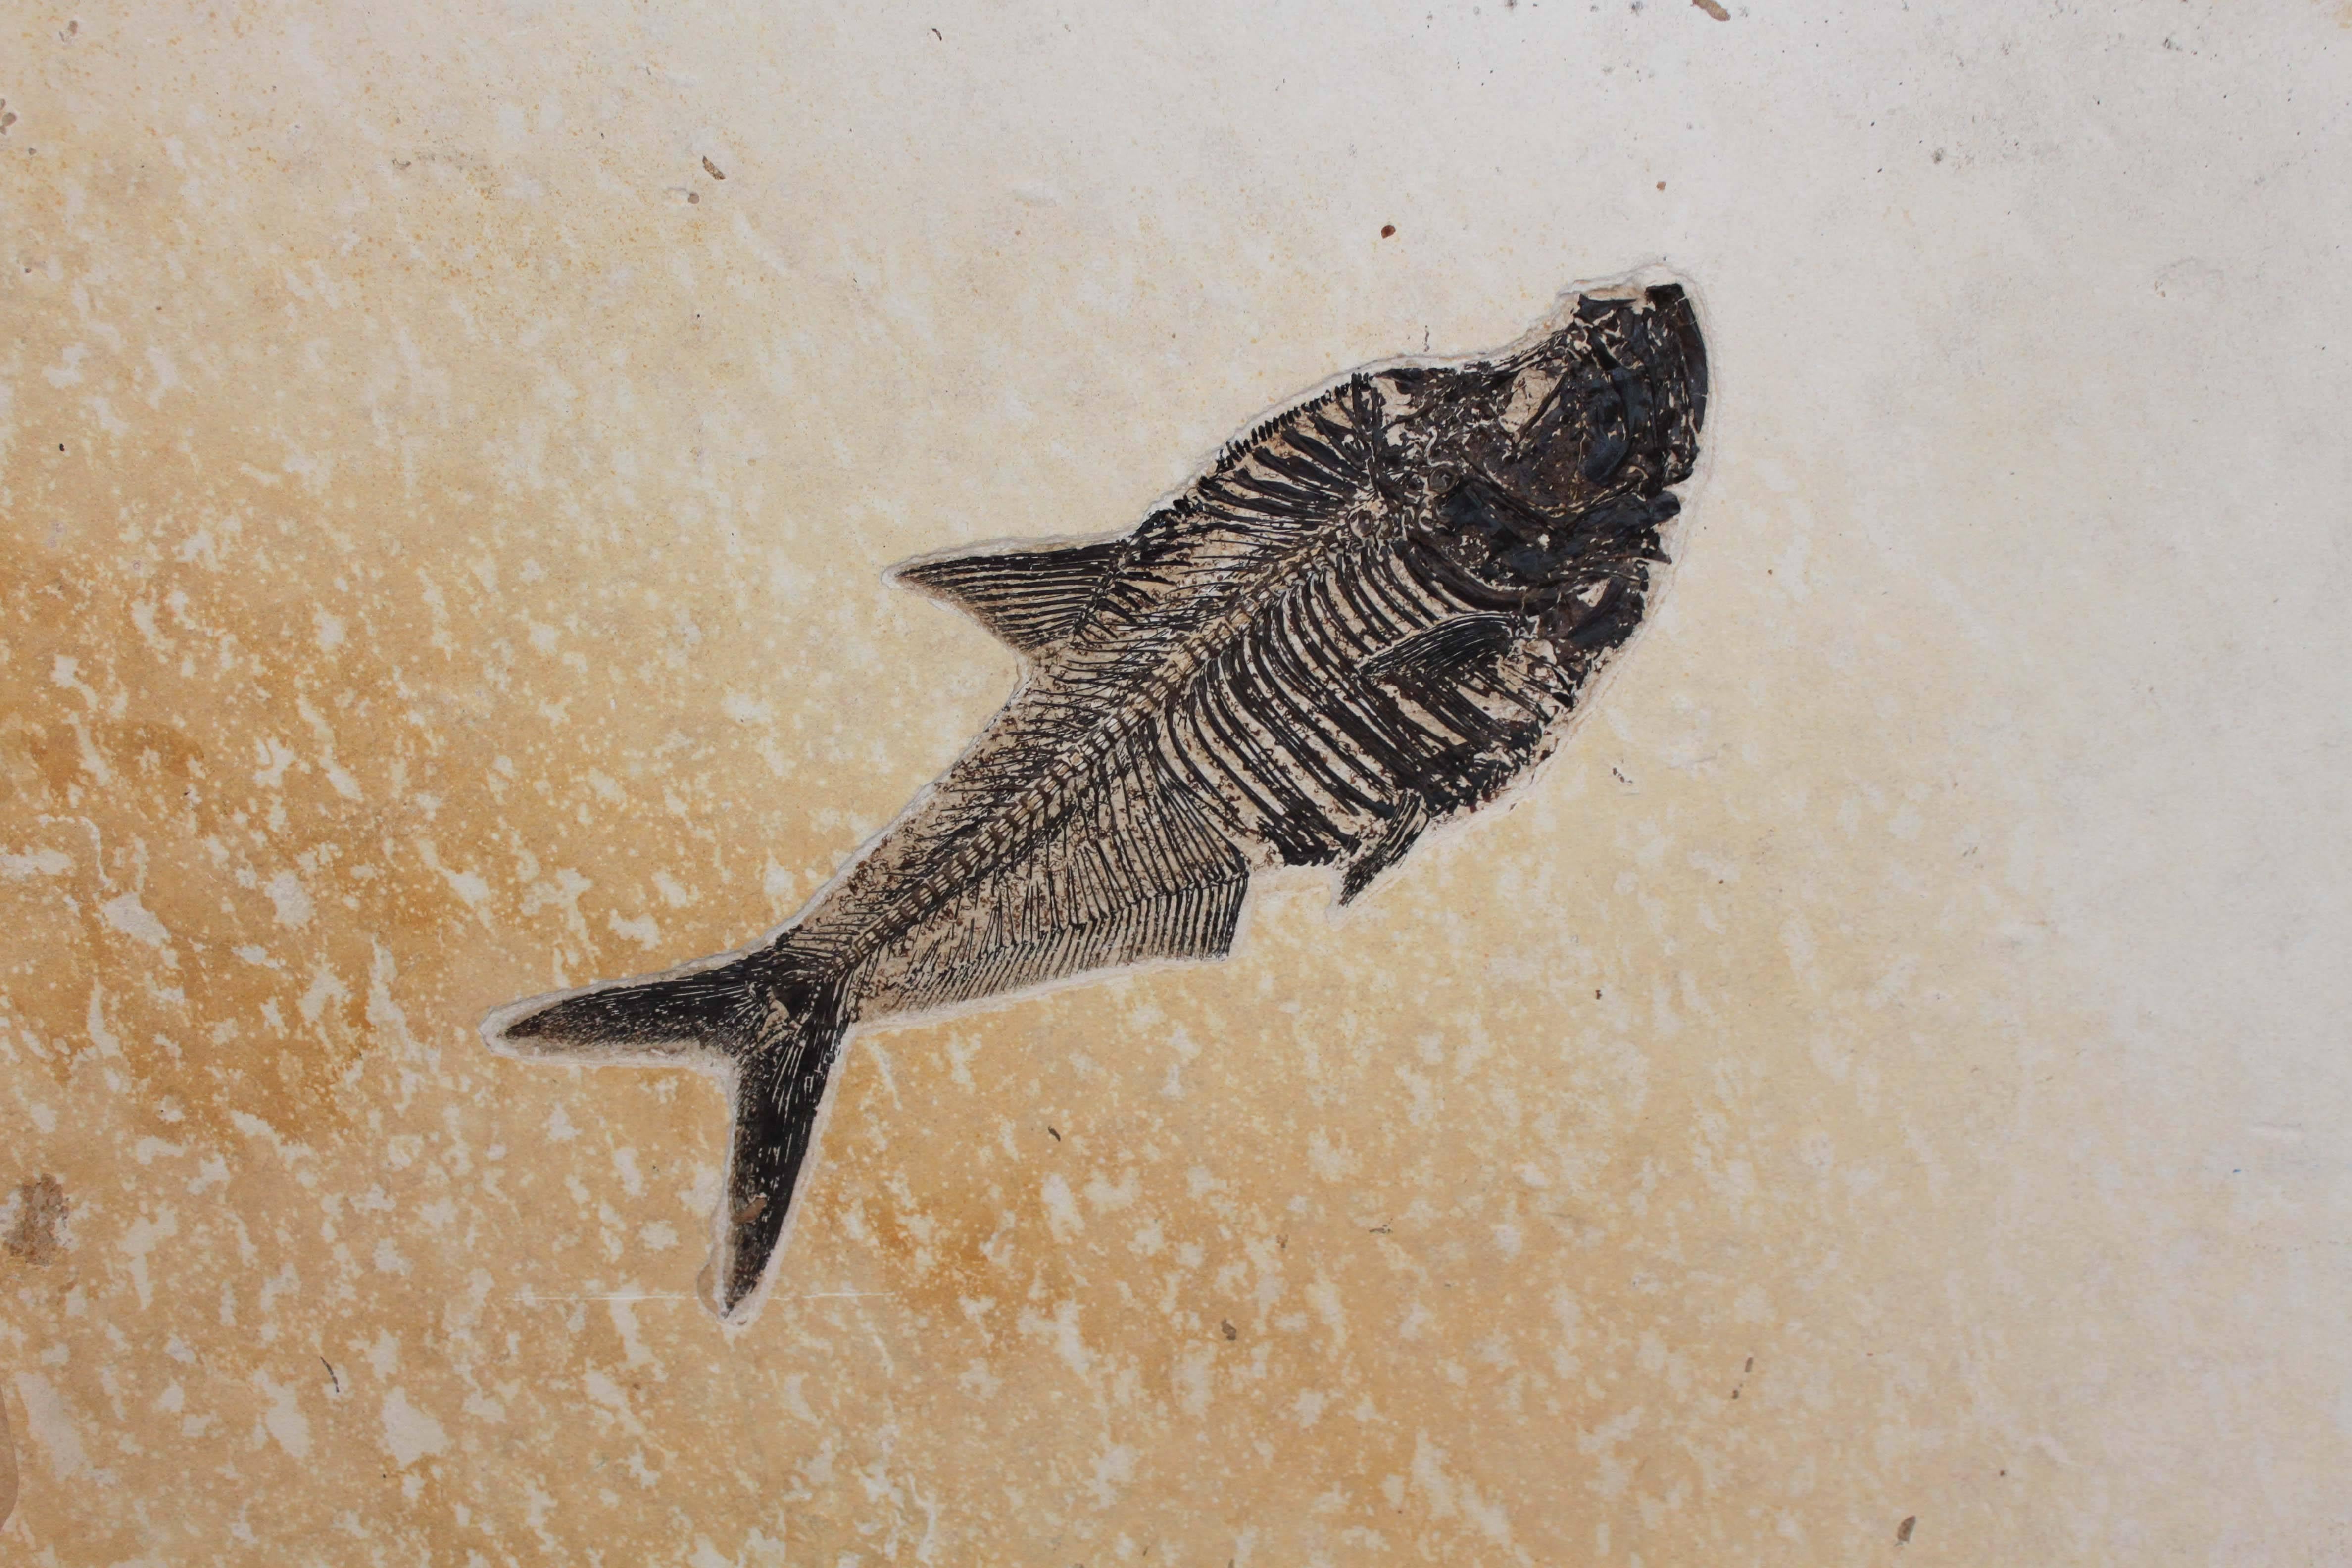 This diplomystus fish fossil is complete and natural, a truly rare finds. From the world famous Green River Formation in Wyoming, the fossil beds span a 5 million year period, dating between 53.5 and 48.5 million years old.